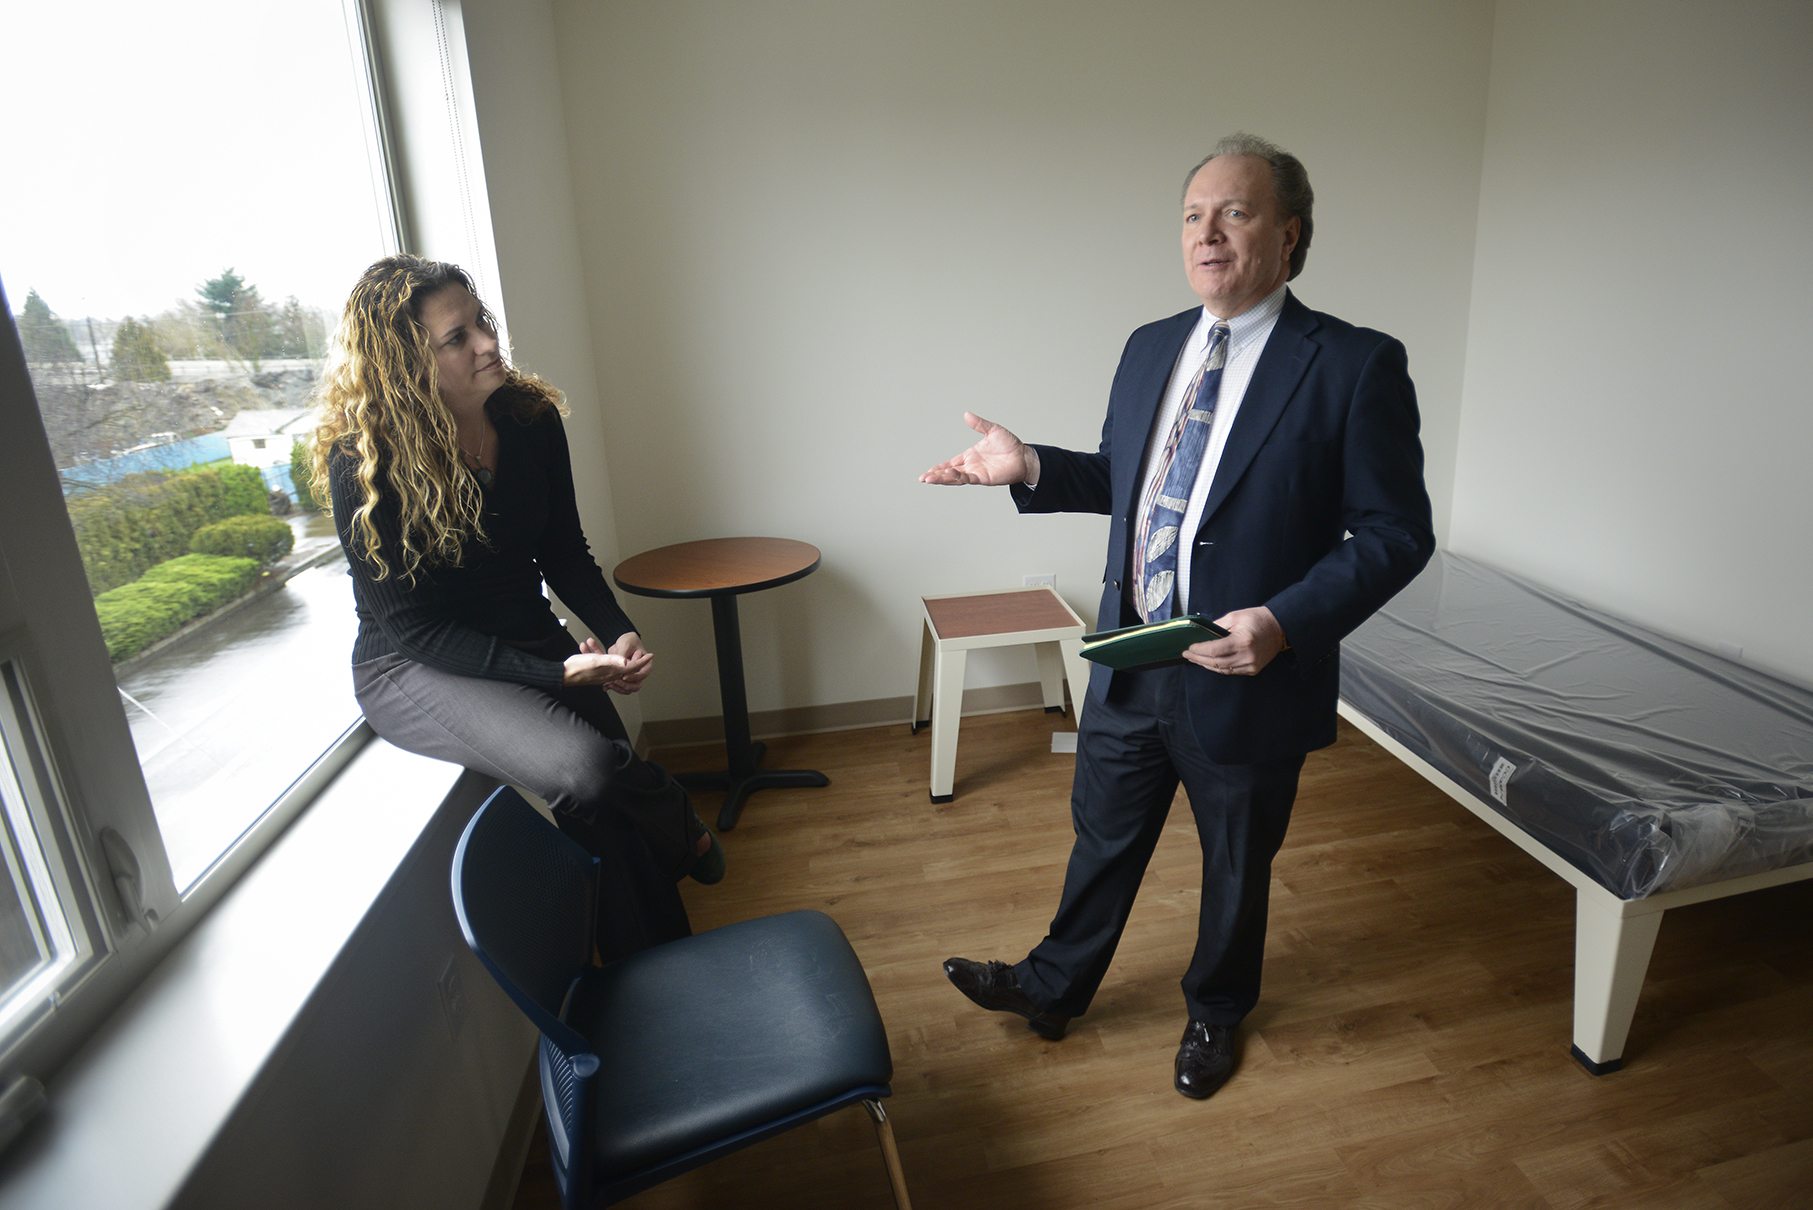 Amy Reynolds of Share, left, and Steve Towell of the Vancouver Housing Authority provide a tour of Lincoln Place, a 30-unit apartment complex in downtown Vancouver for the chronically homeless.